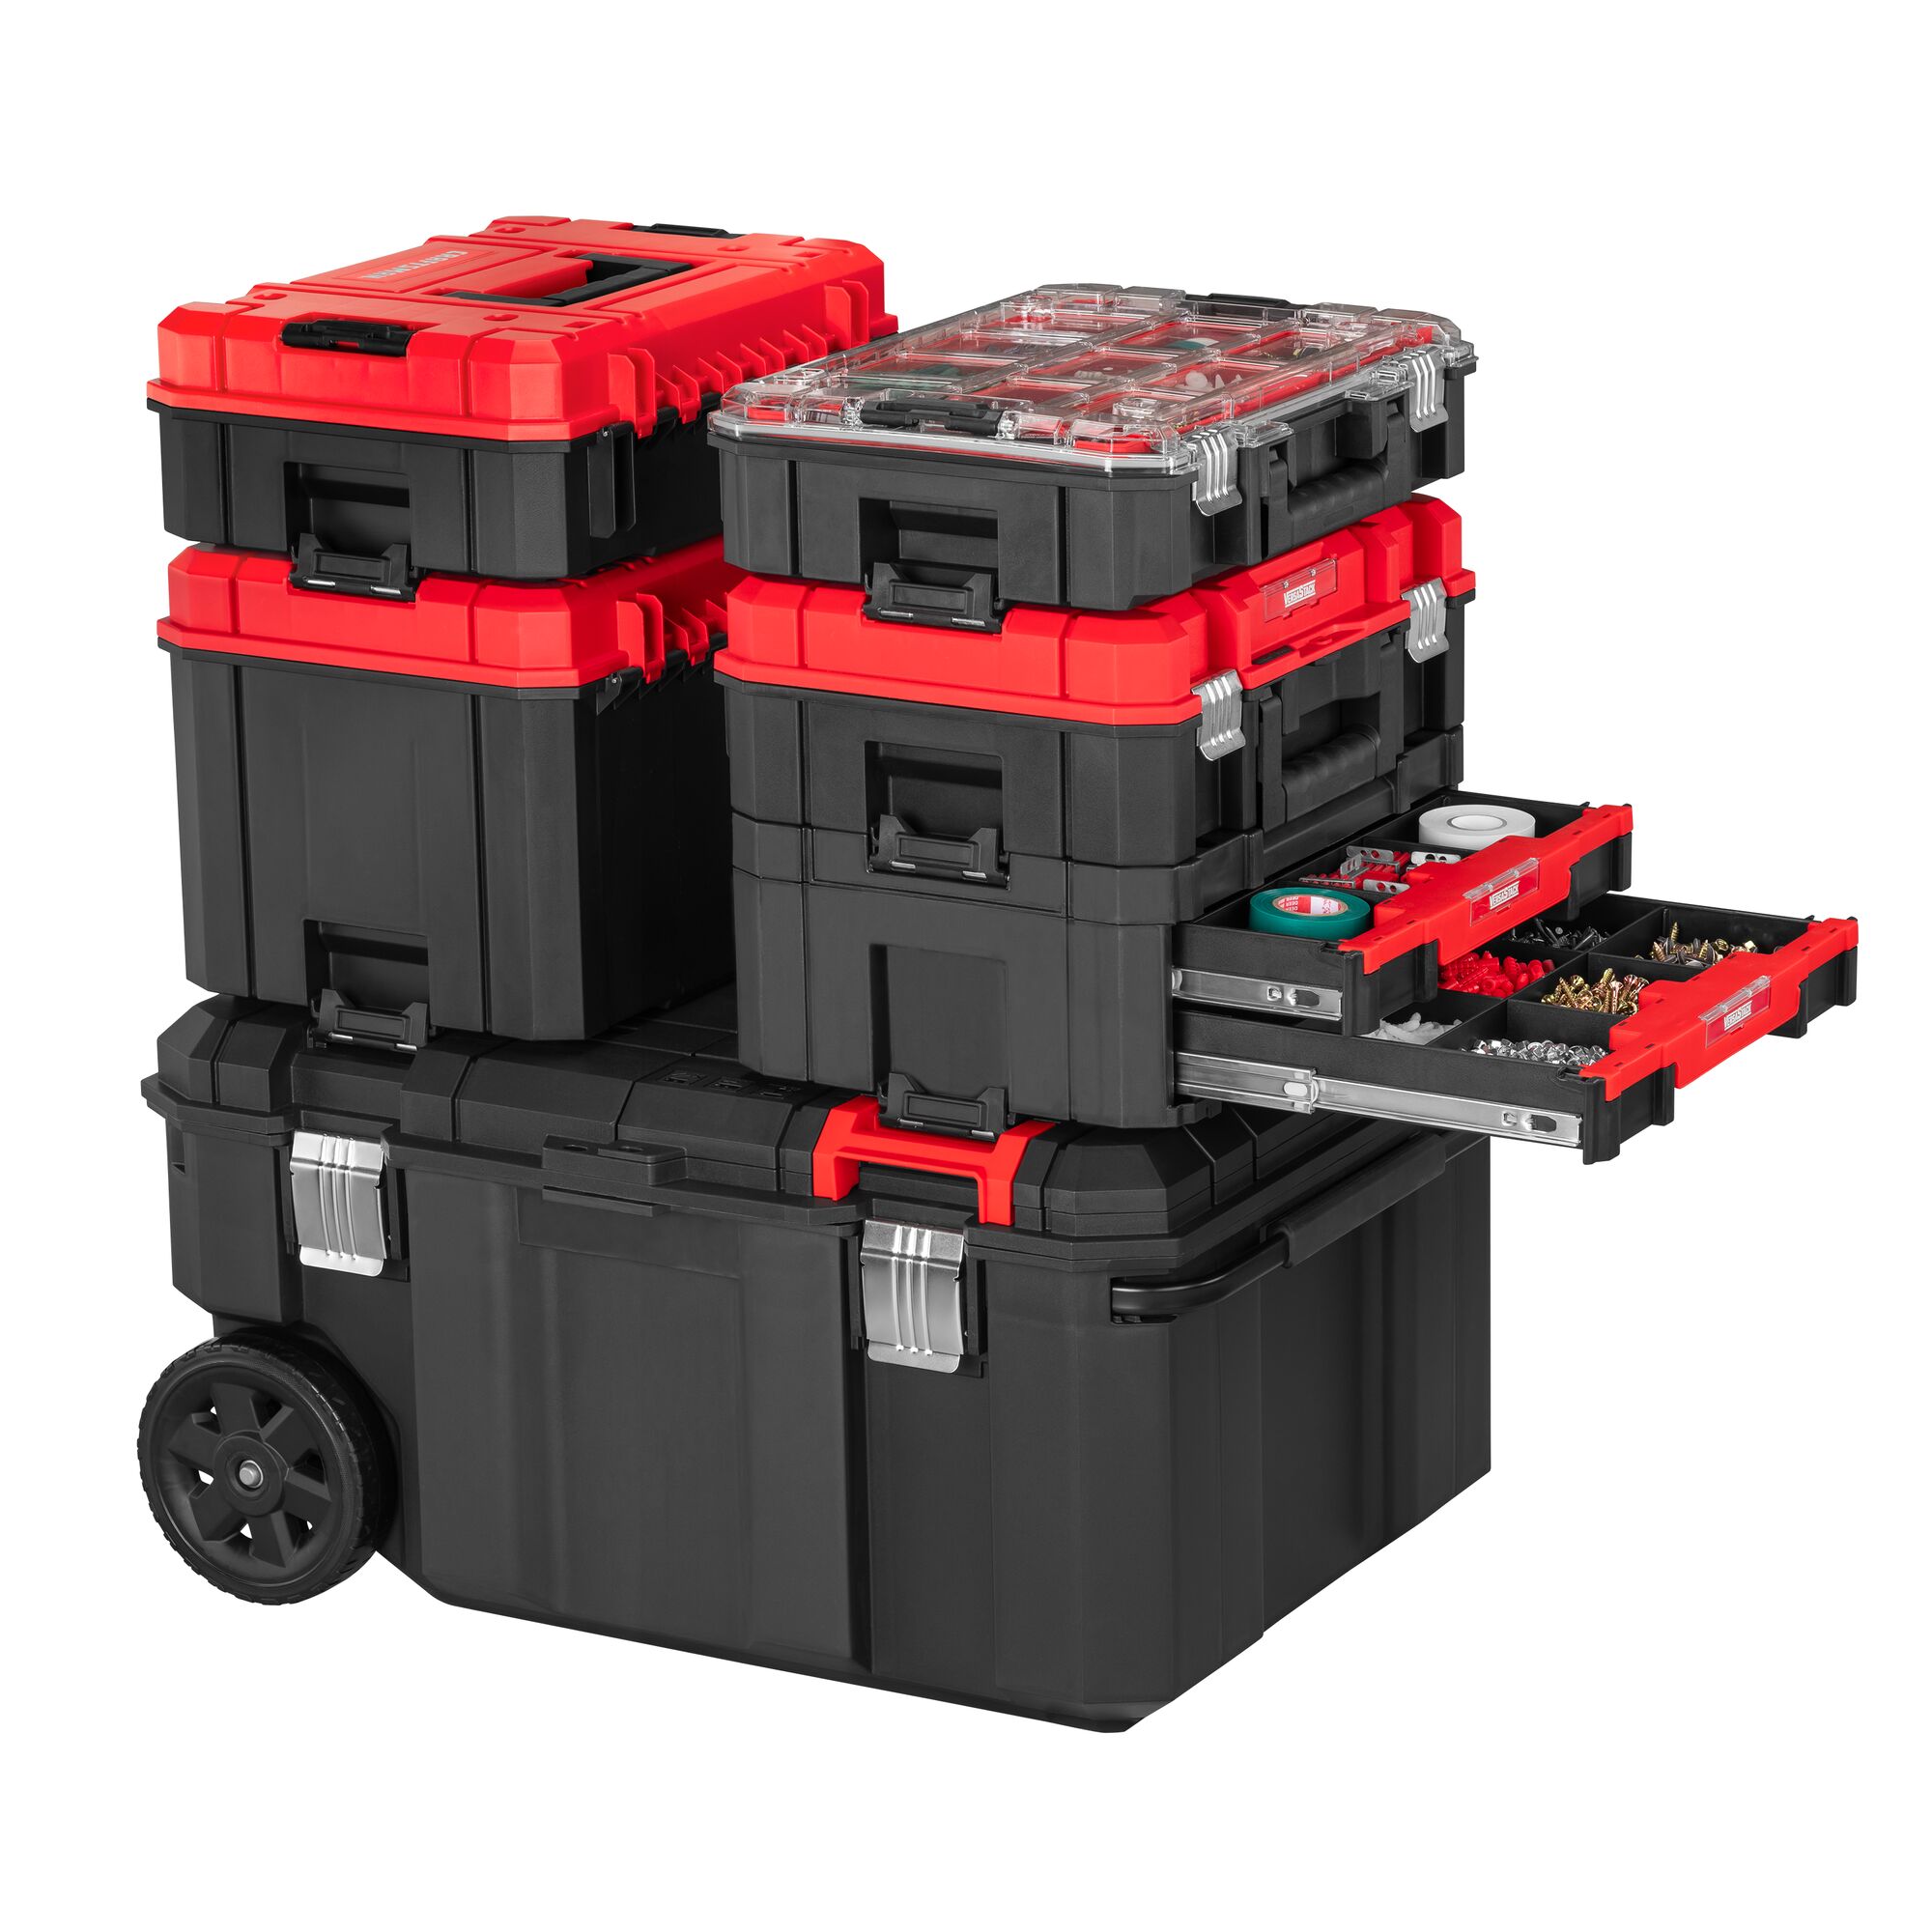 Craftsman TradeStack System 21.45-in Ball-Bearing 2-Drawer Black STRUCTURAL Foam Tool Box | CMST21404